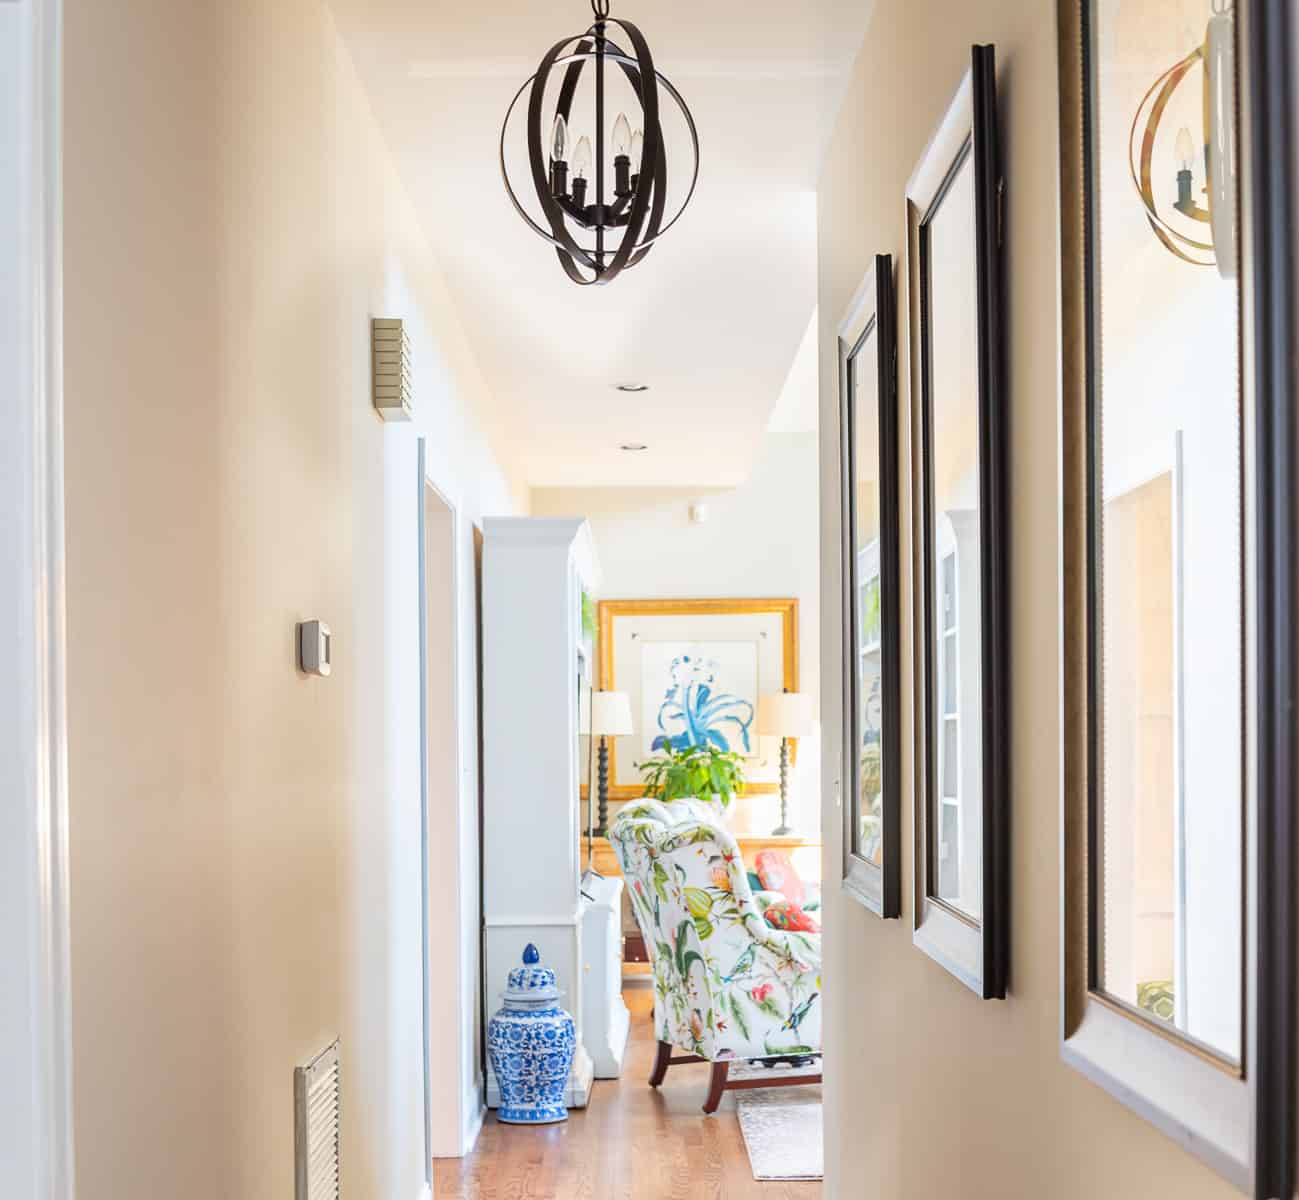 Easy Hallway Decorating Ideas for a Long, Narrow Space